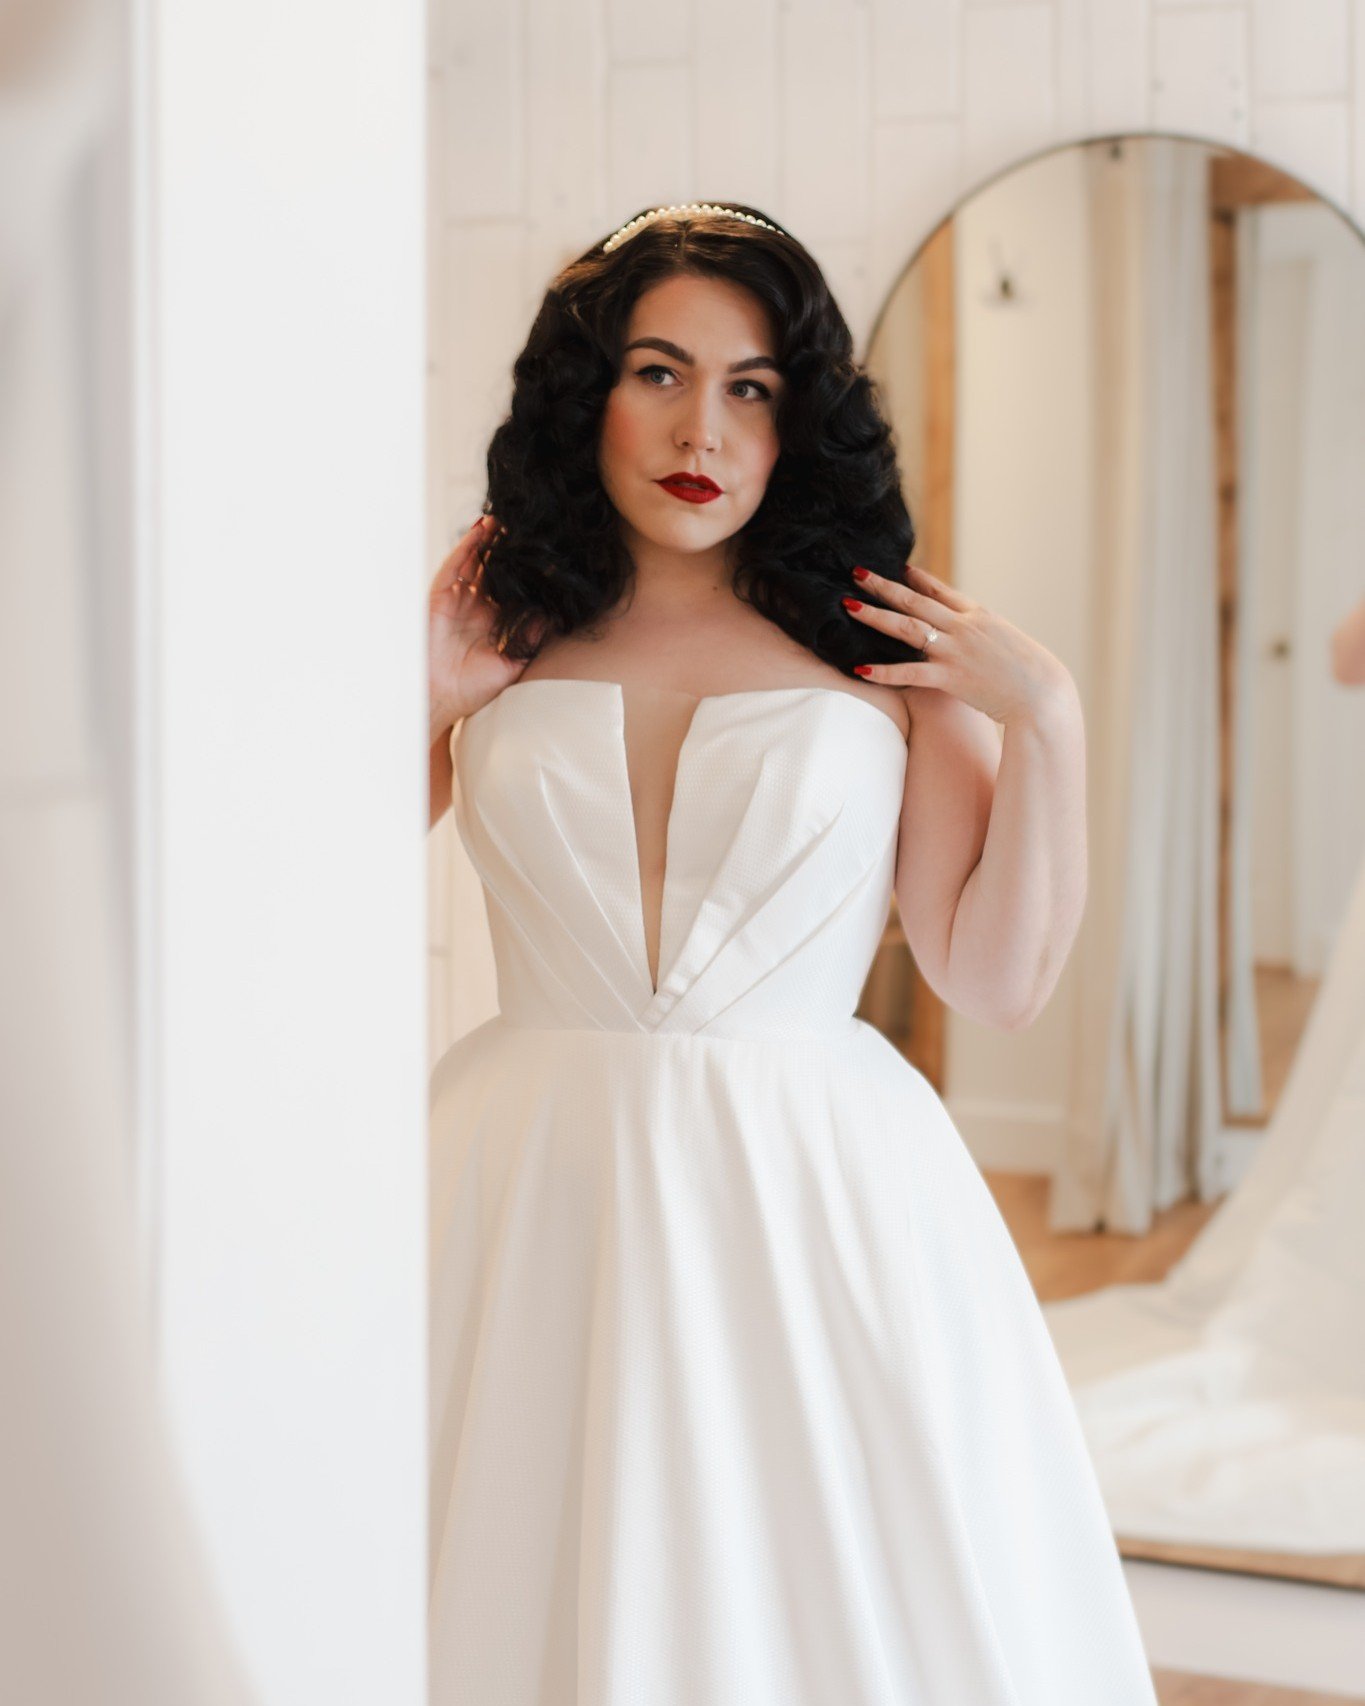 We are pretty sure there's a Princess 👑 missing at the ball!!! 😍 / Nous sommes pas mal certaines qu'il y a une Princesse 👑 qui manque &agrave; l'appel!!! 😍
...
Model: @beezors 
Dress: Amber Marie by @maggiesotterodesigns 
Discover the dress ⬇️
ht